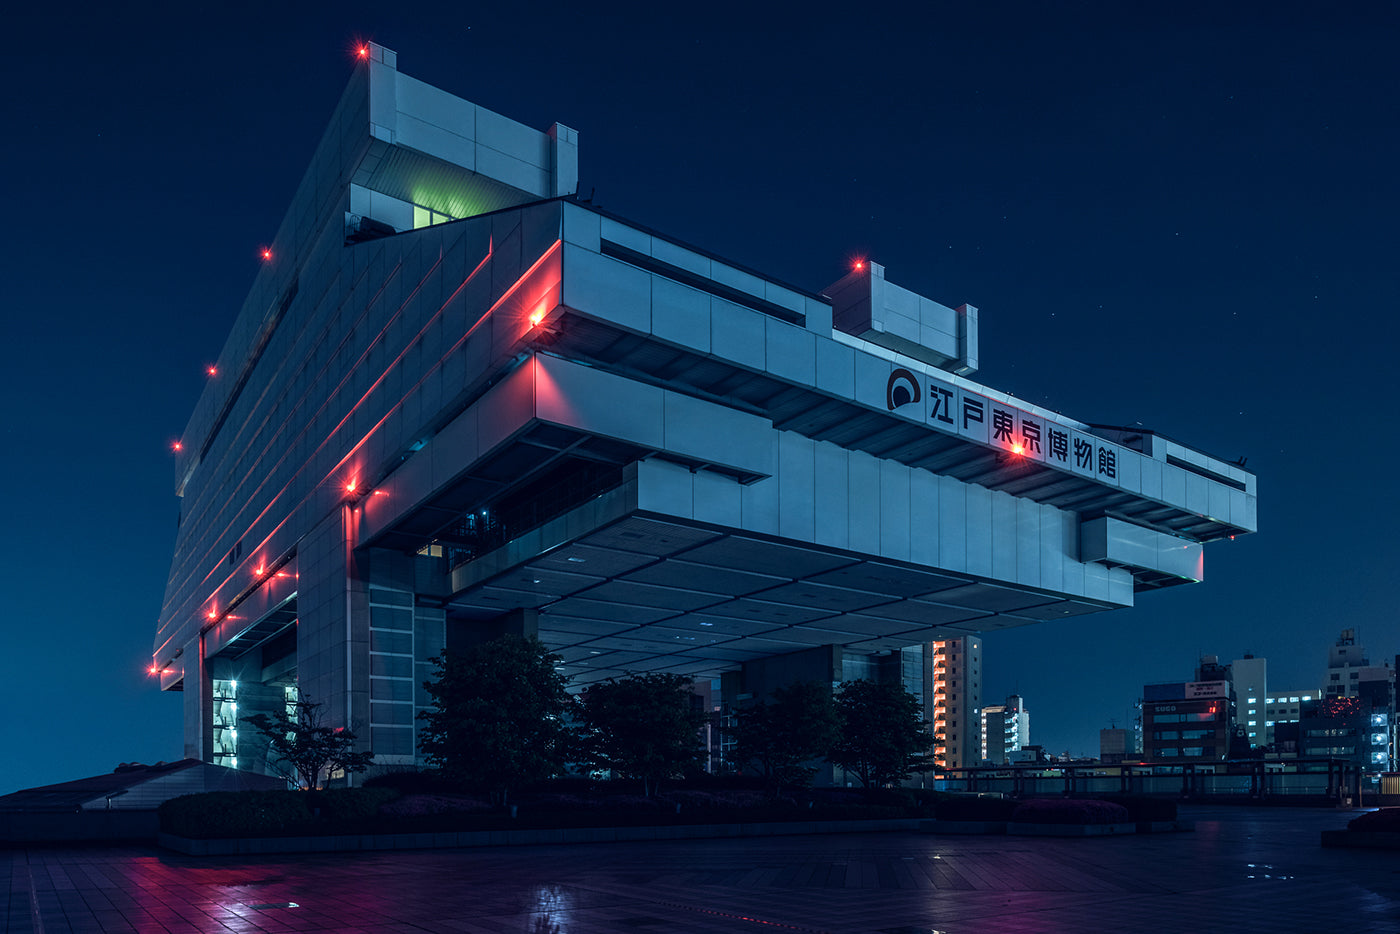 The Edo-Tokyo Museum could pass as a sinister HQ for a faceless bad guy in this series. (Photo: Tom Blachford)